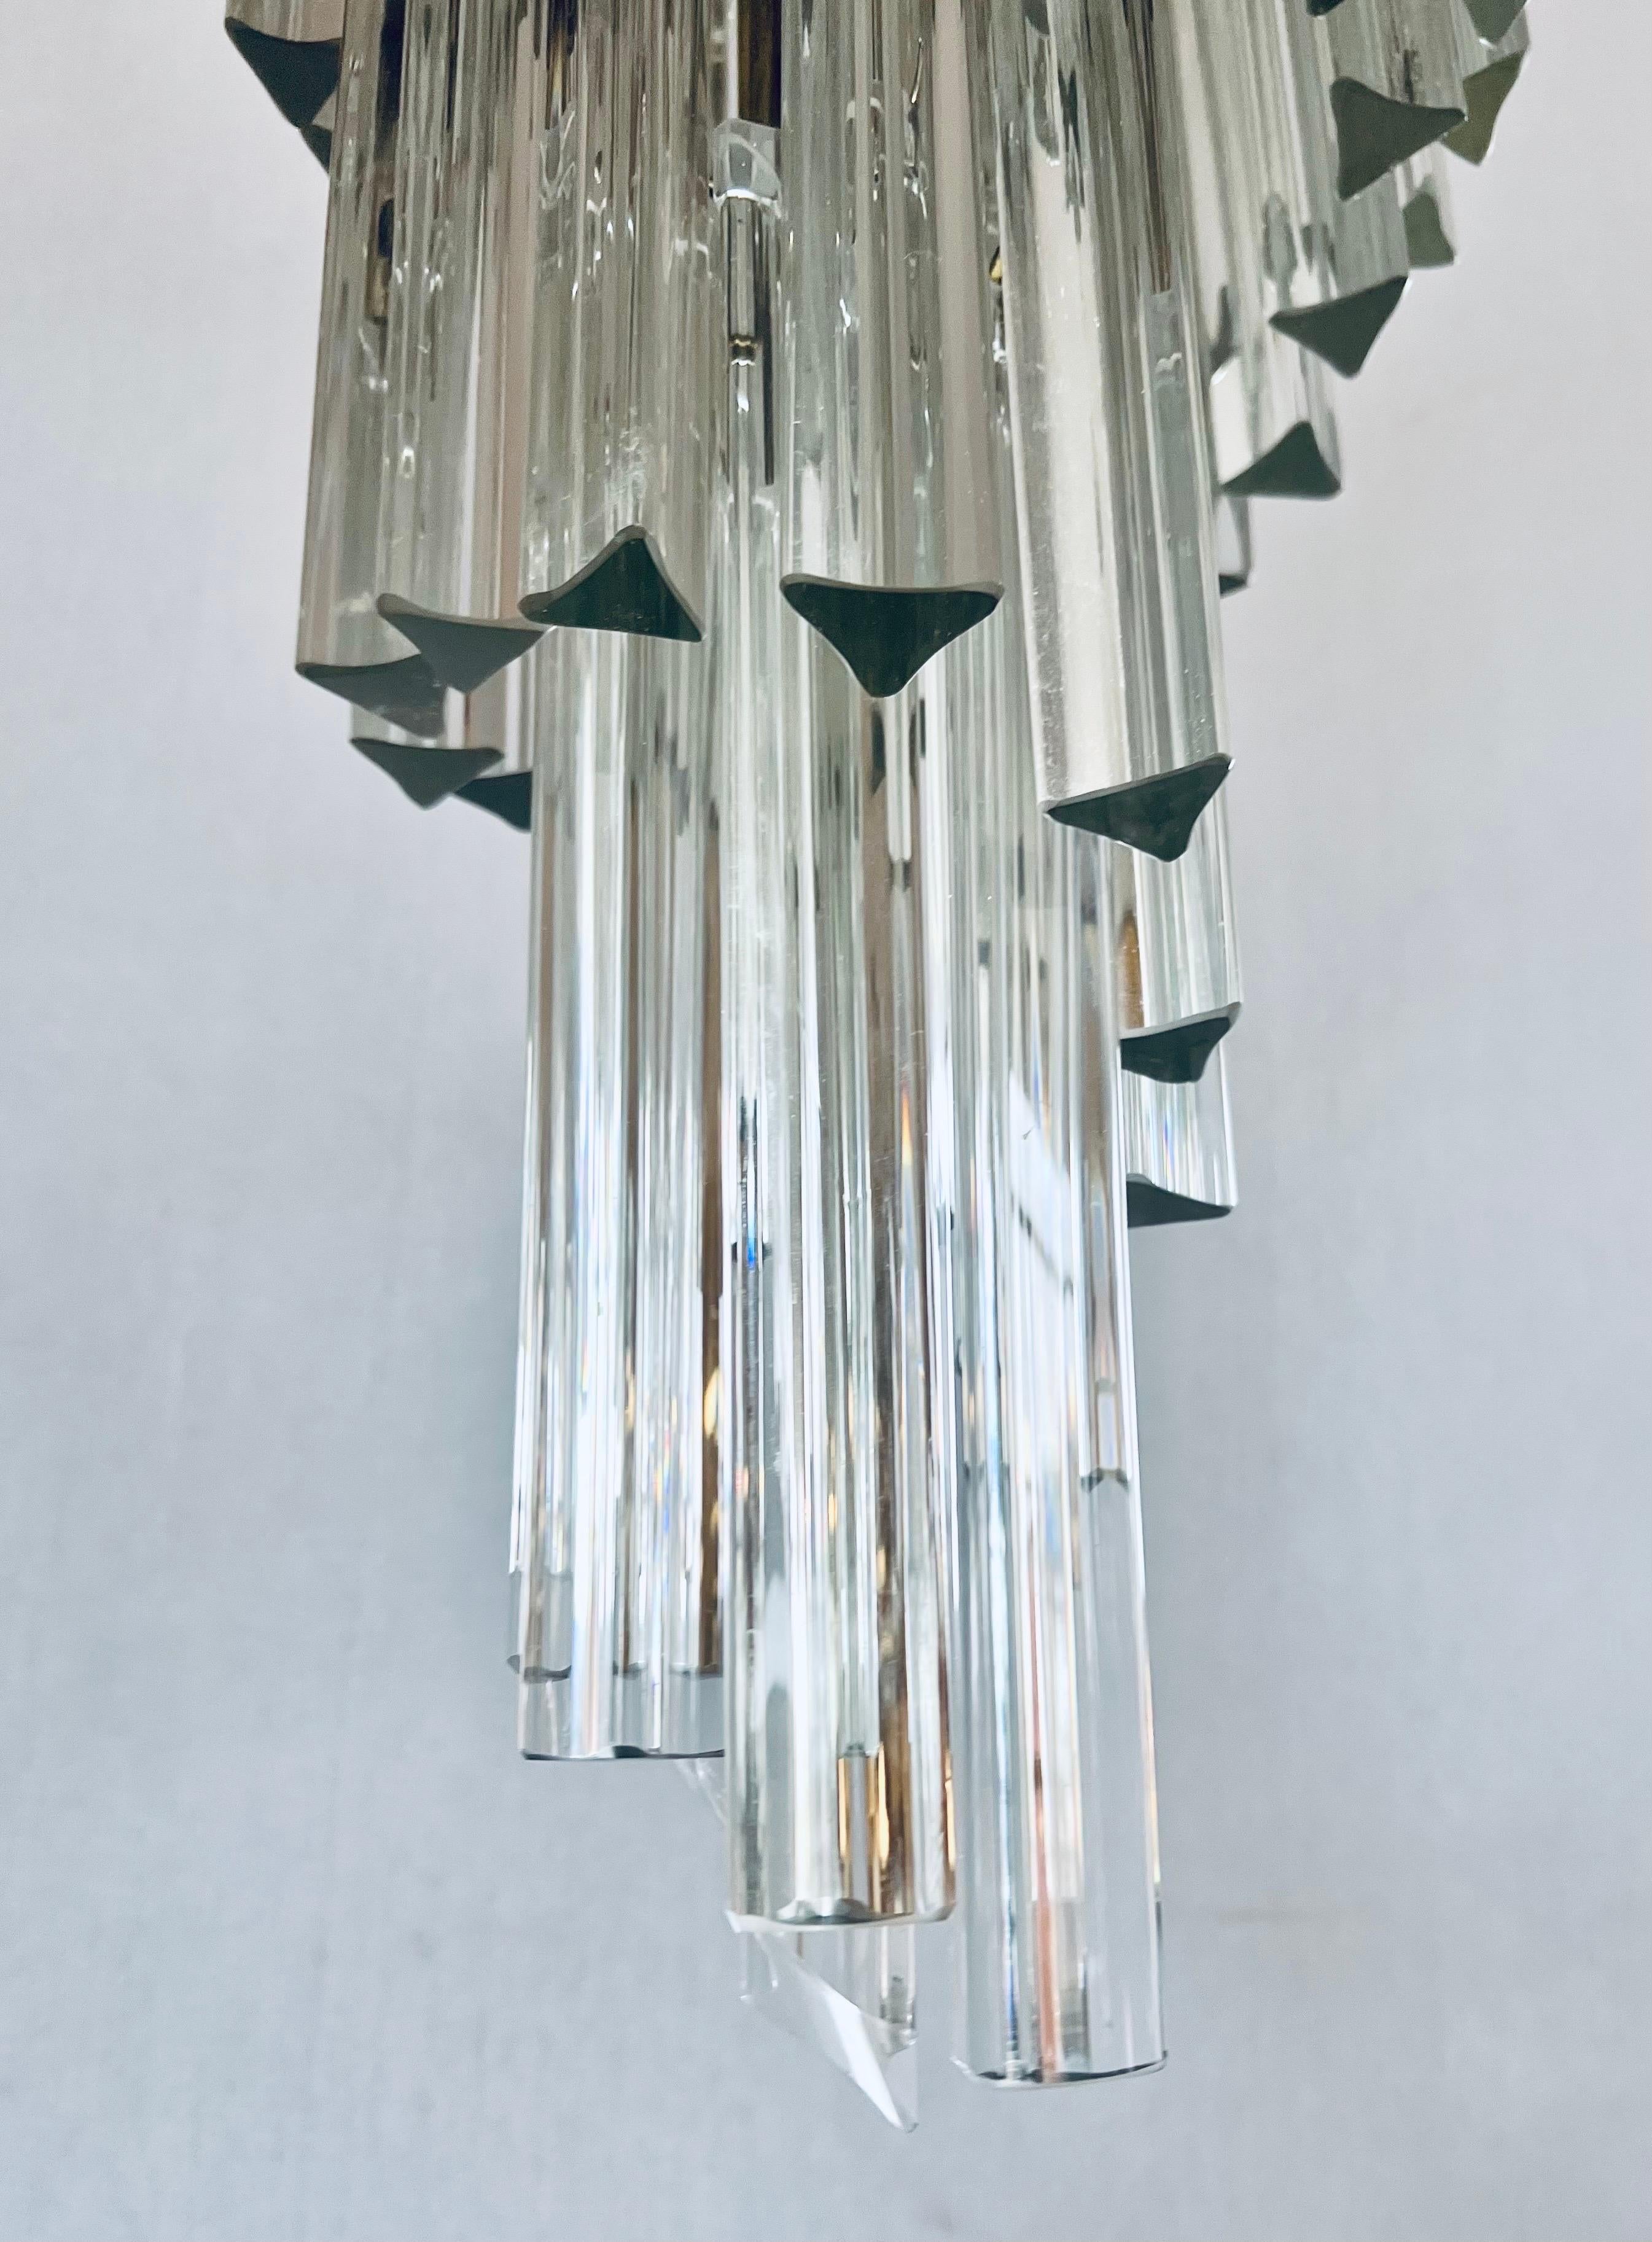 Stunning mid century modern Camer Glass prism chandelier with spiral flow.
Each of the prisms is removable. Six lights altogether. Why not own the best.
Wired for USA and in perfect working order.